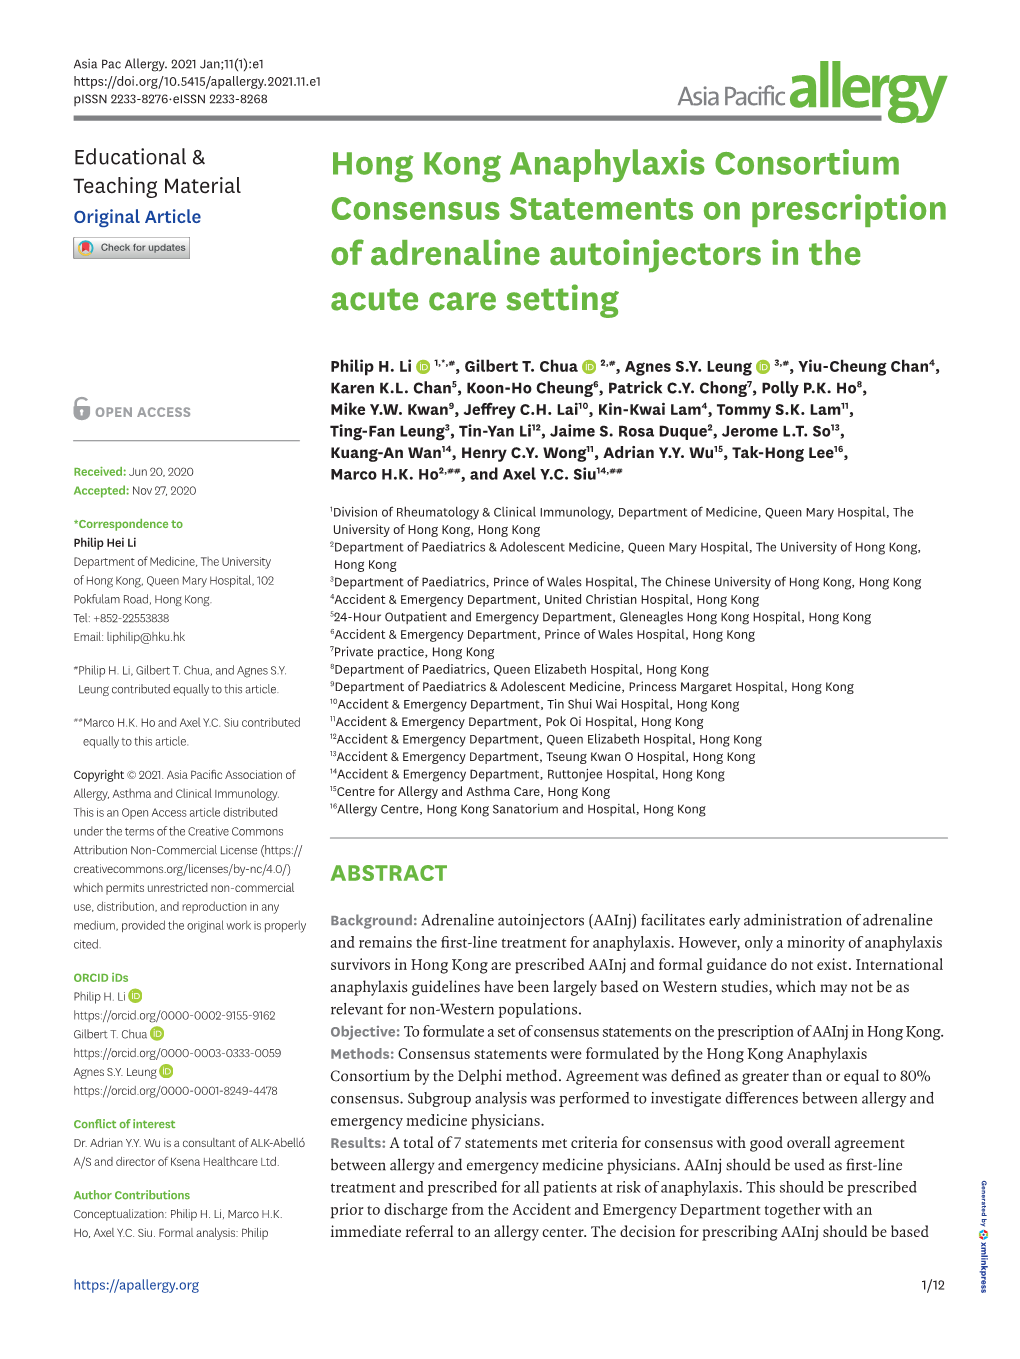 Hong Kong Anaphylaxis Consortium Consensus Statements On